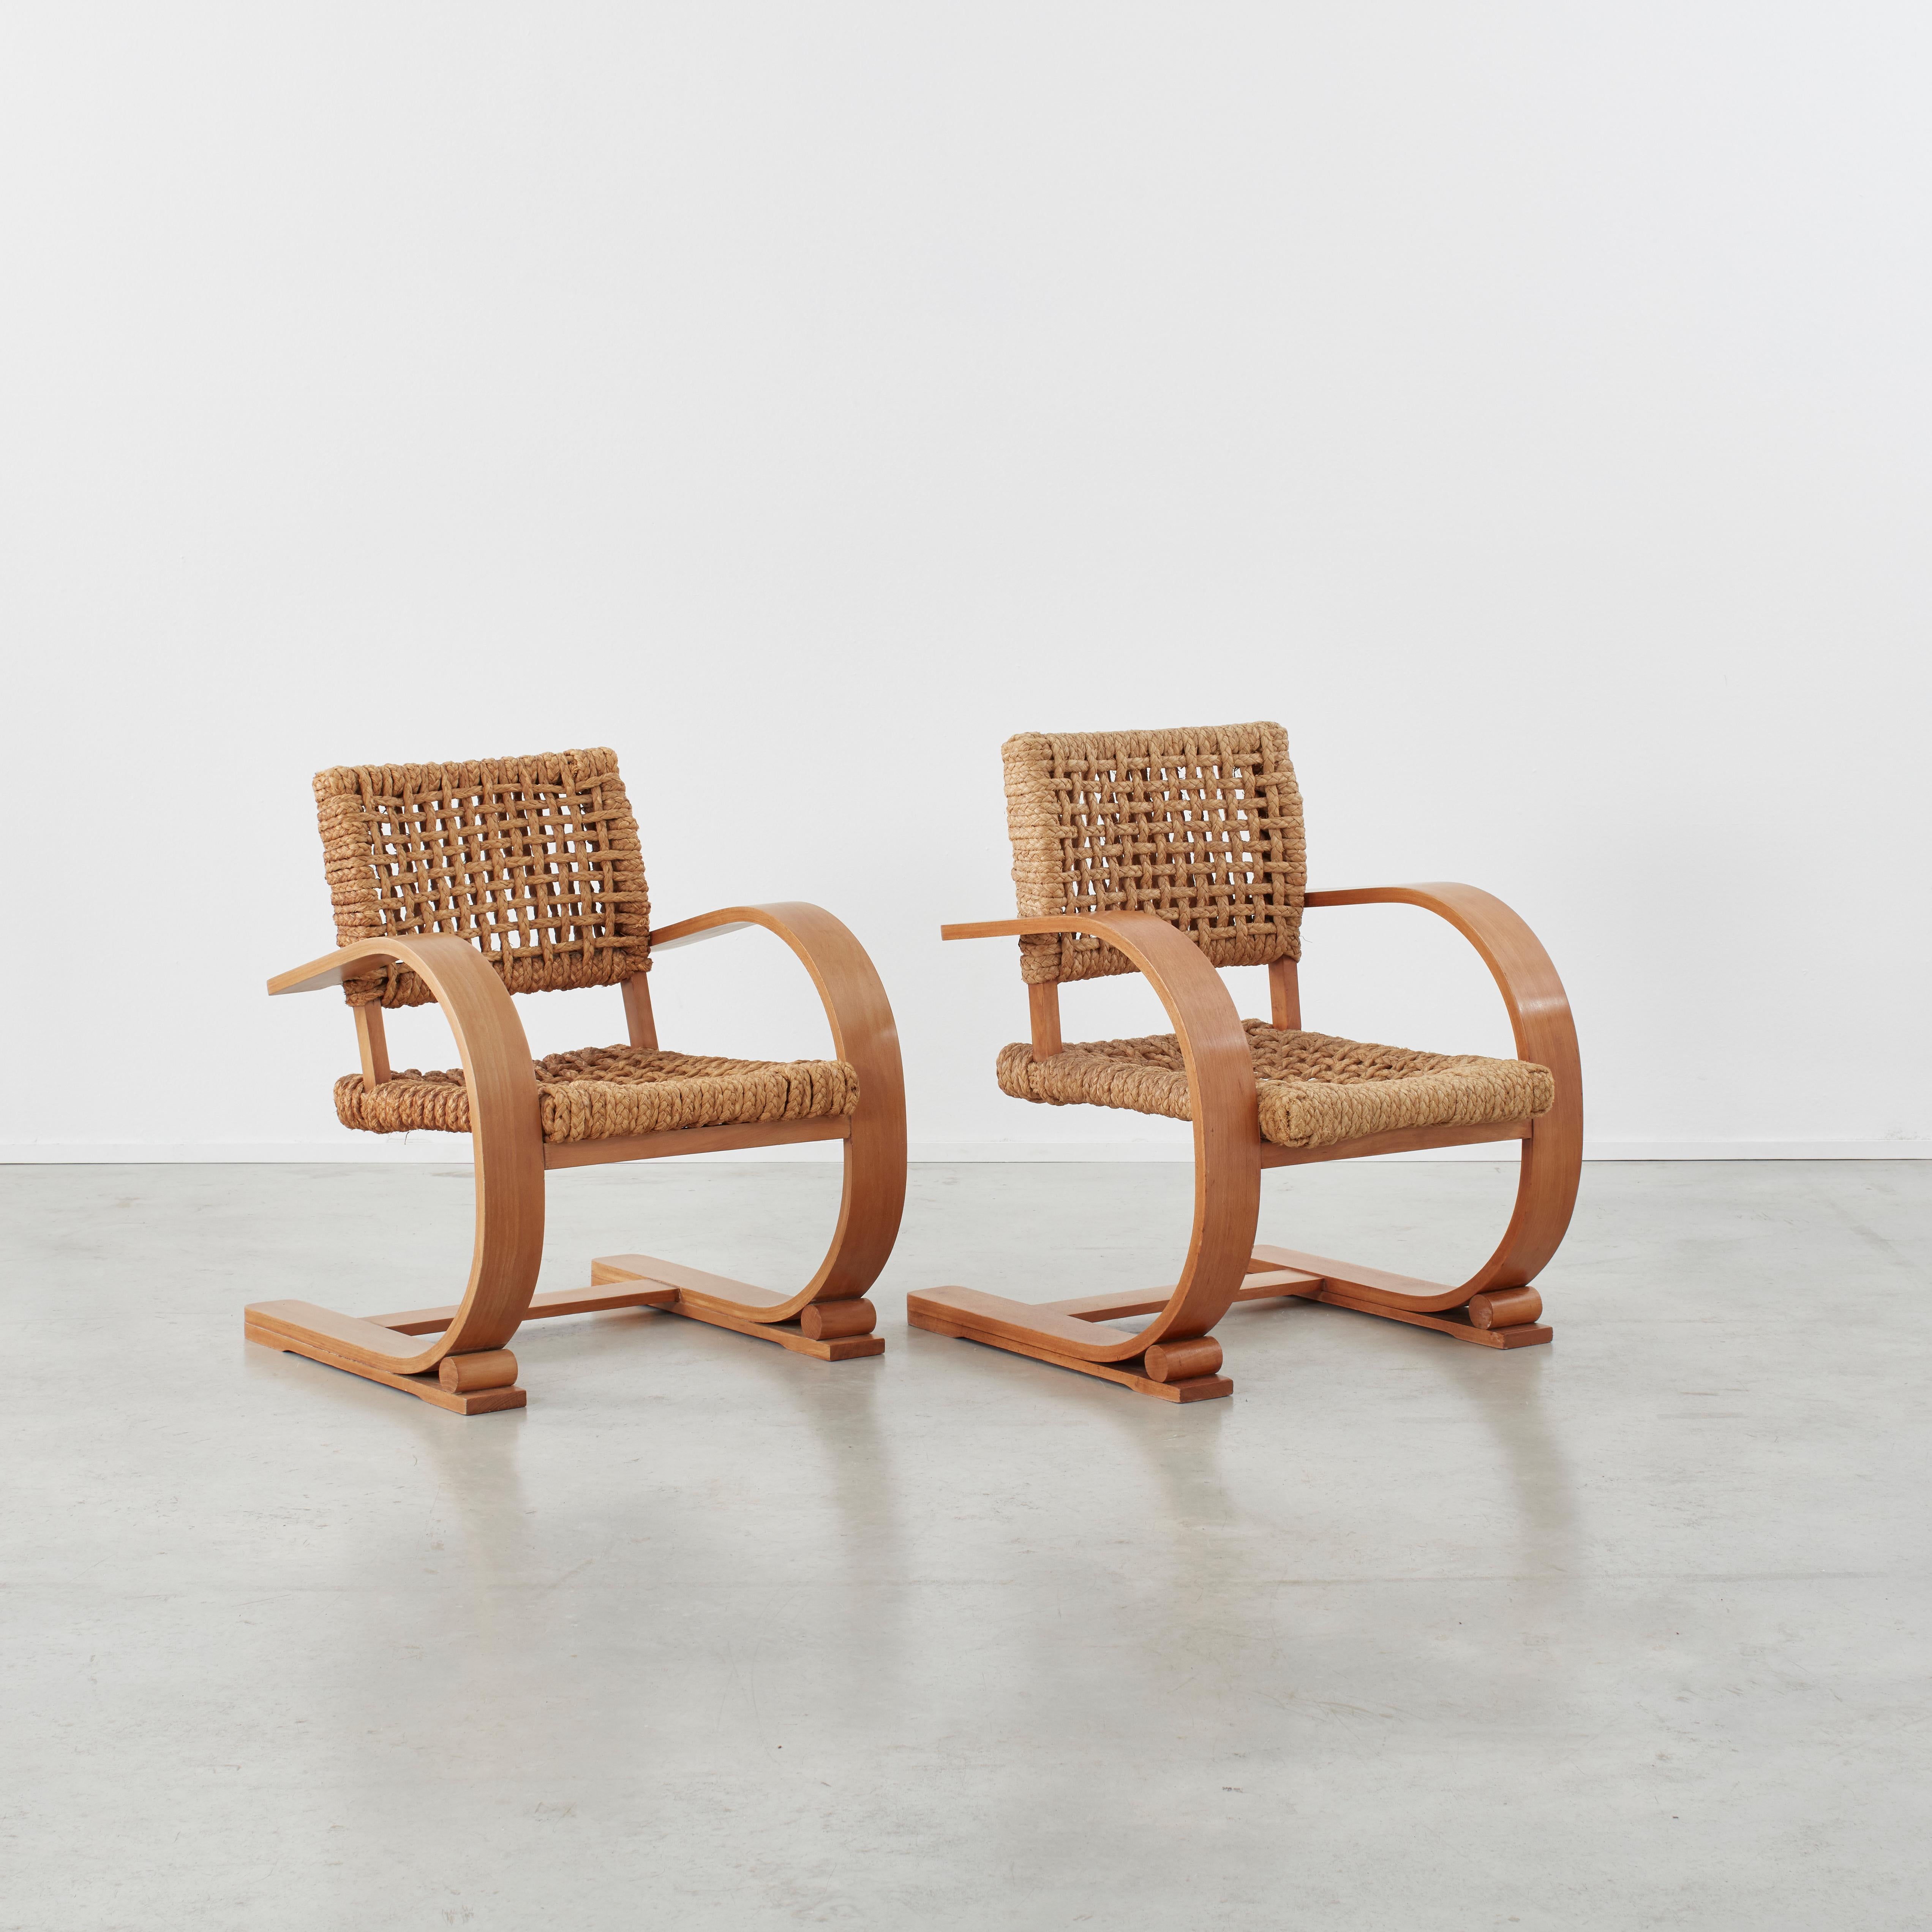 Modern Pair of Pair of Audoux & Minet Rope Armchairs for Vibo Vesoul, France, c1940